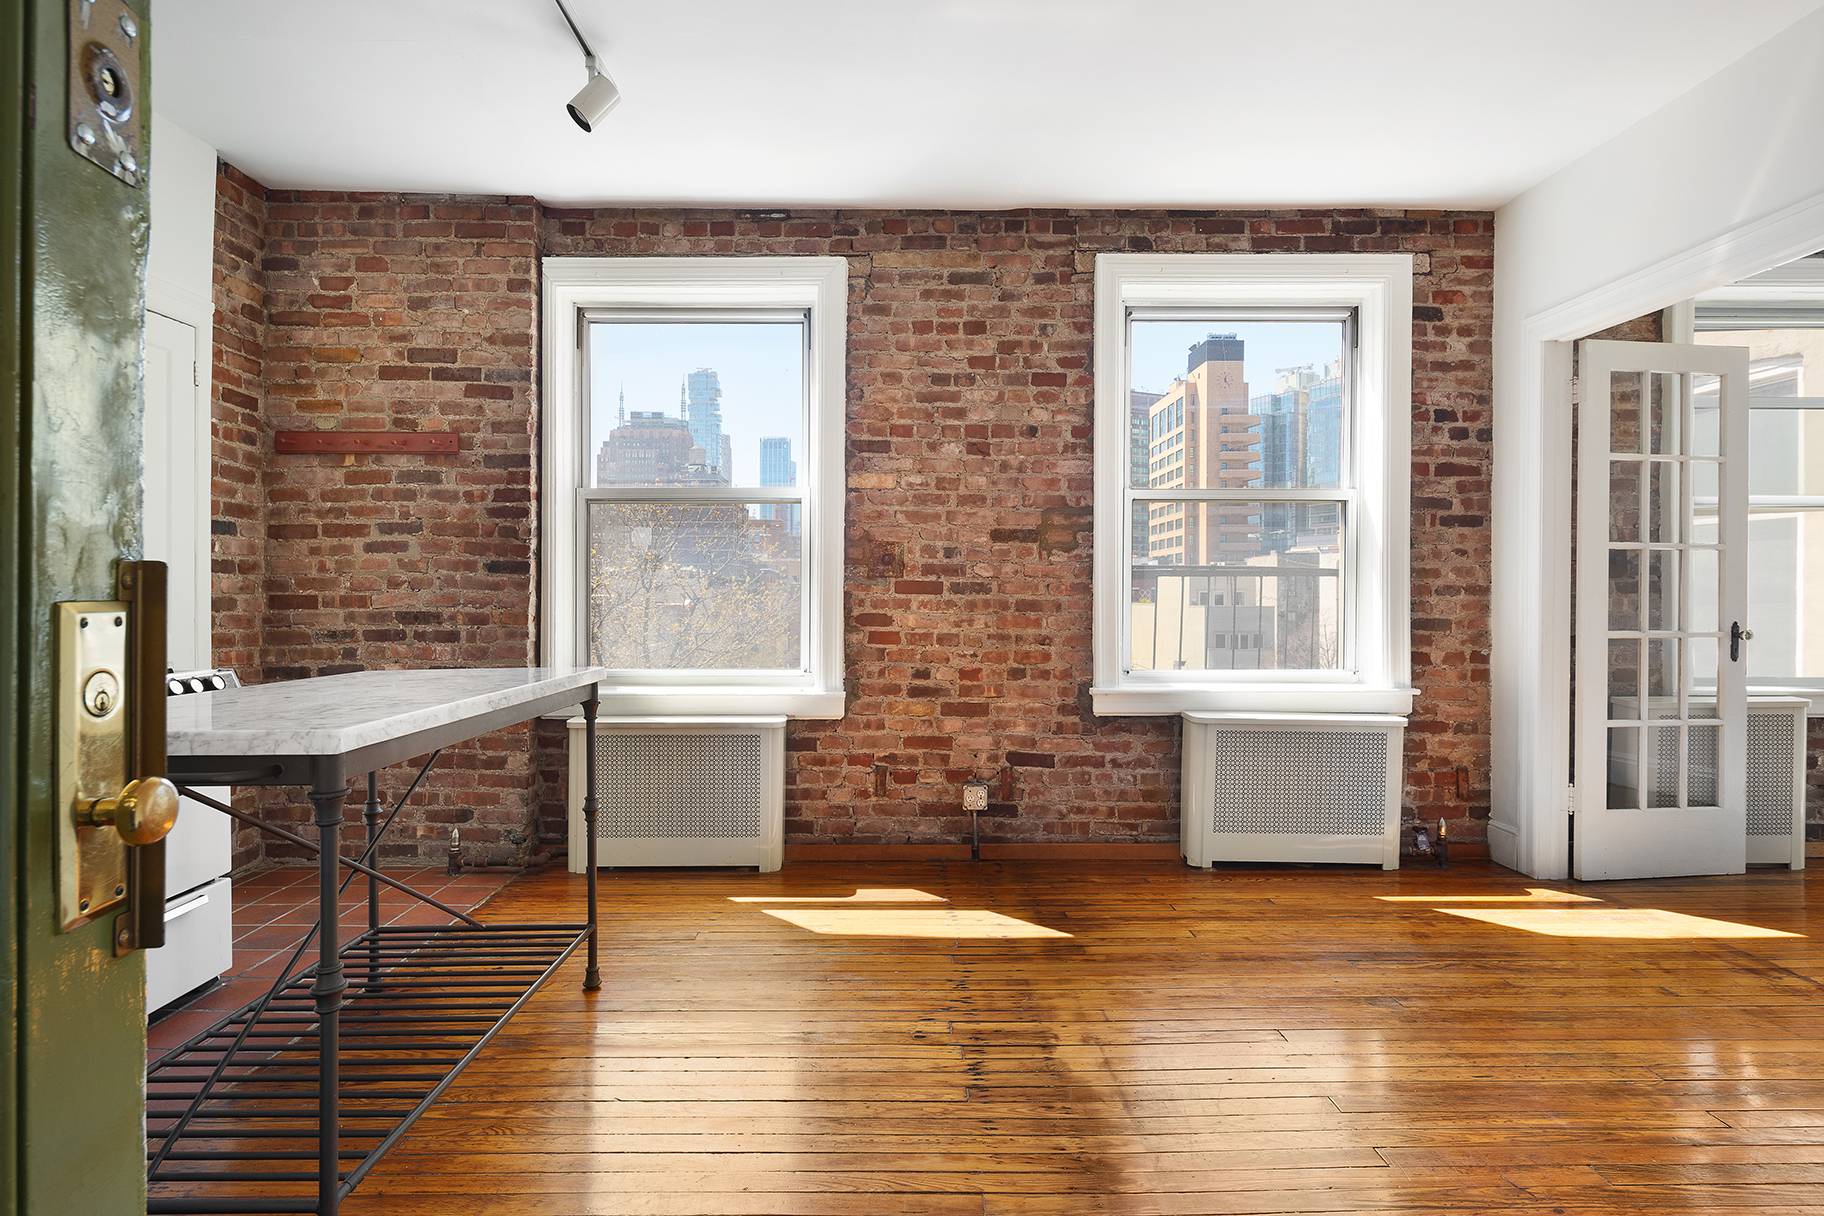 CONTRACTS OUT The quintessential New York home with open south facing views of lower Manhattan.